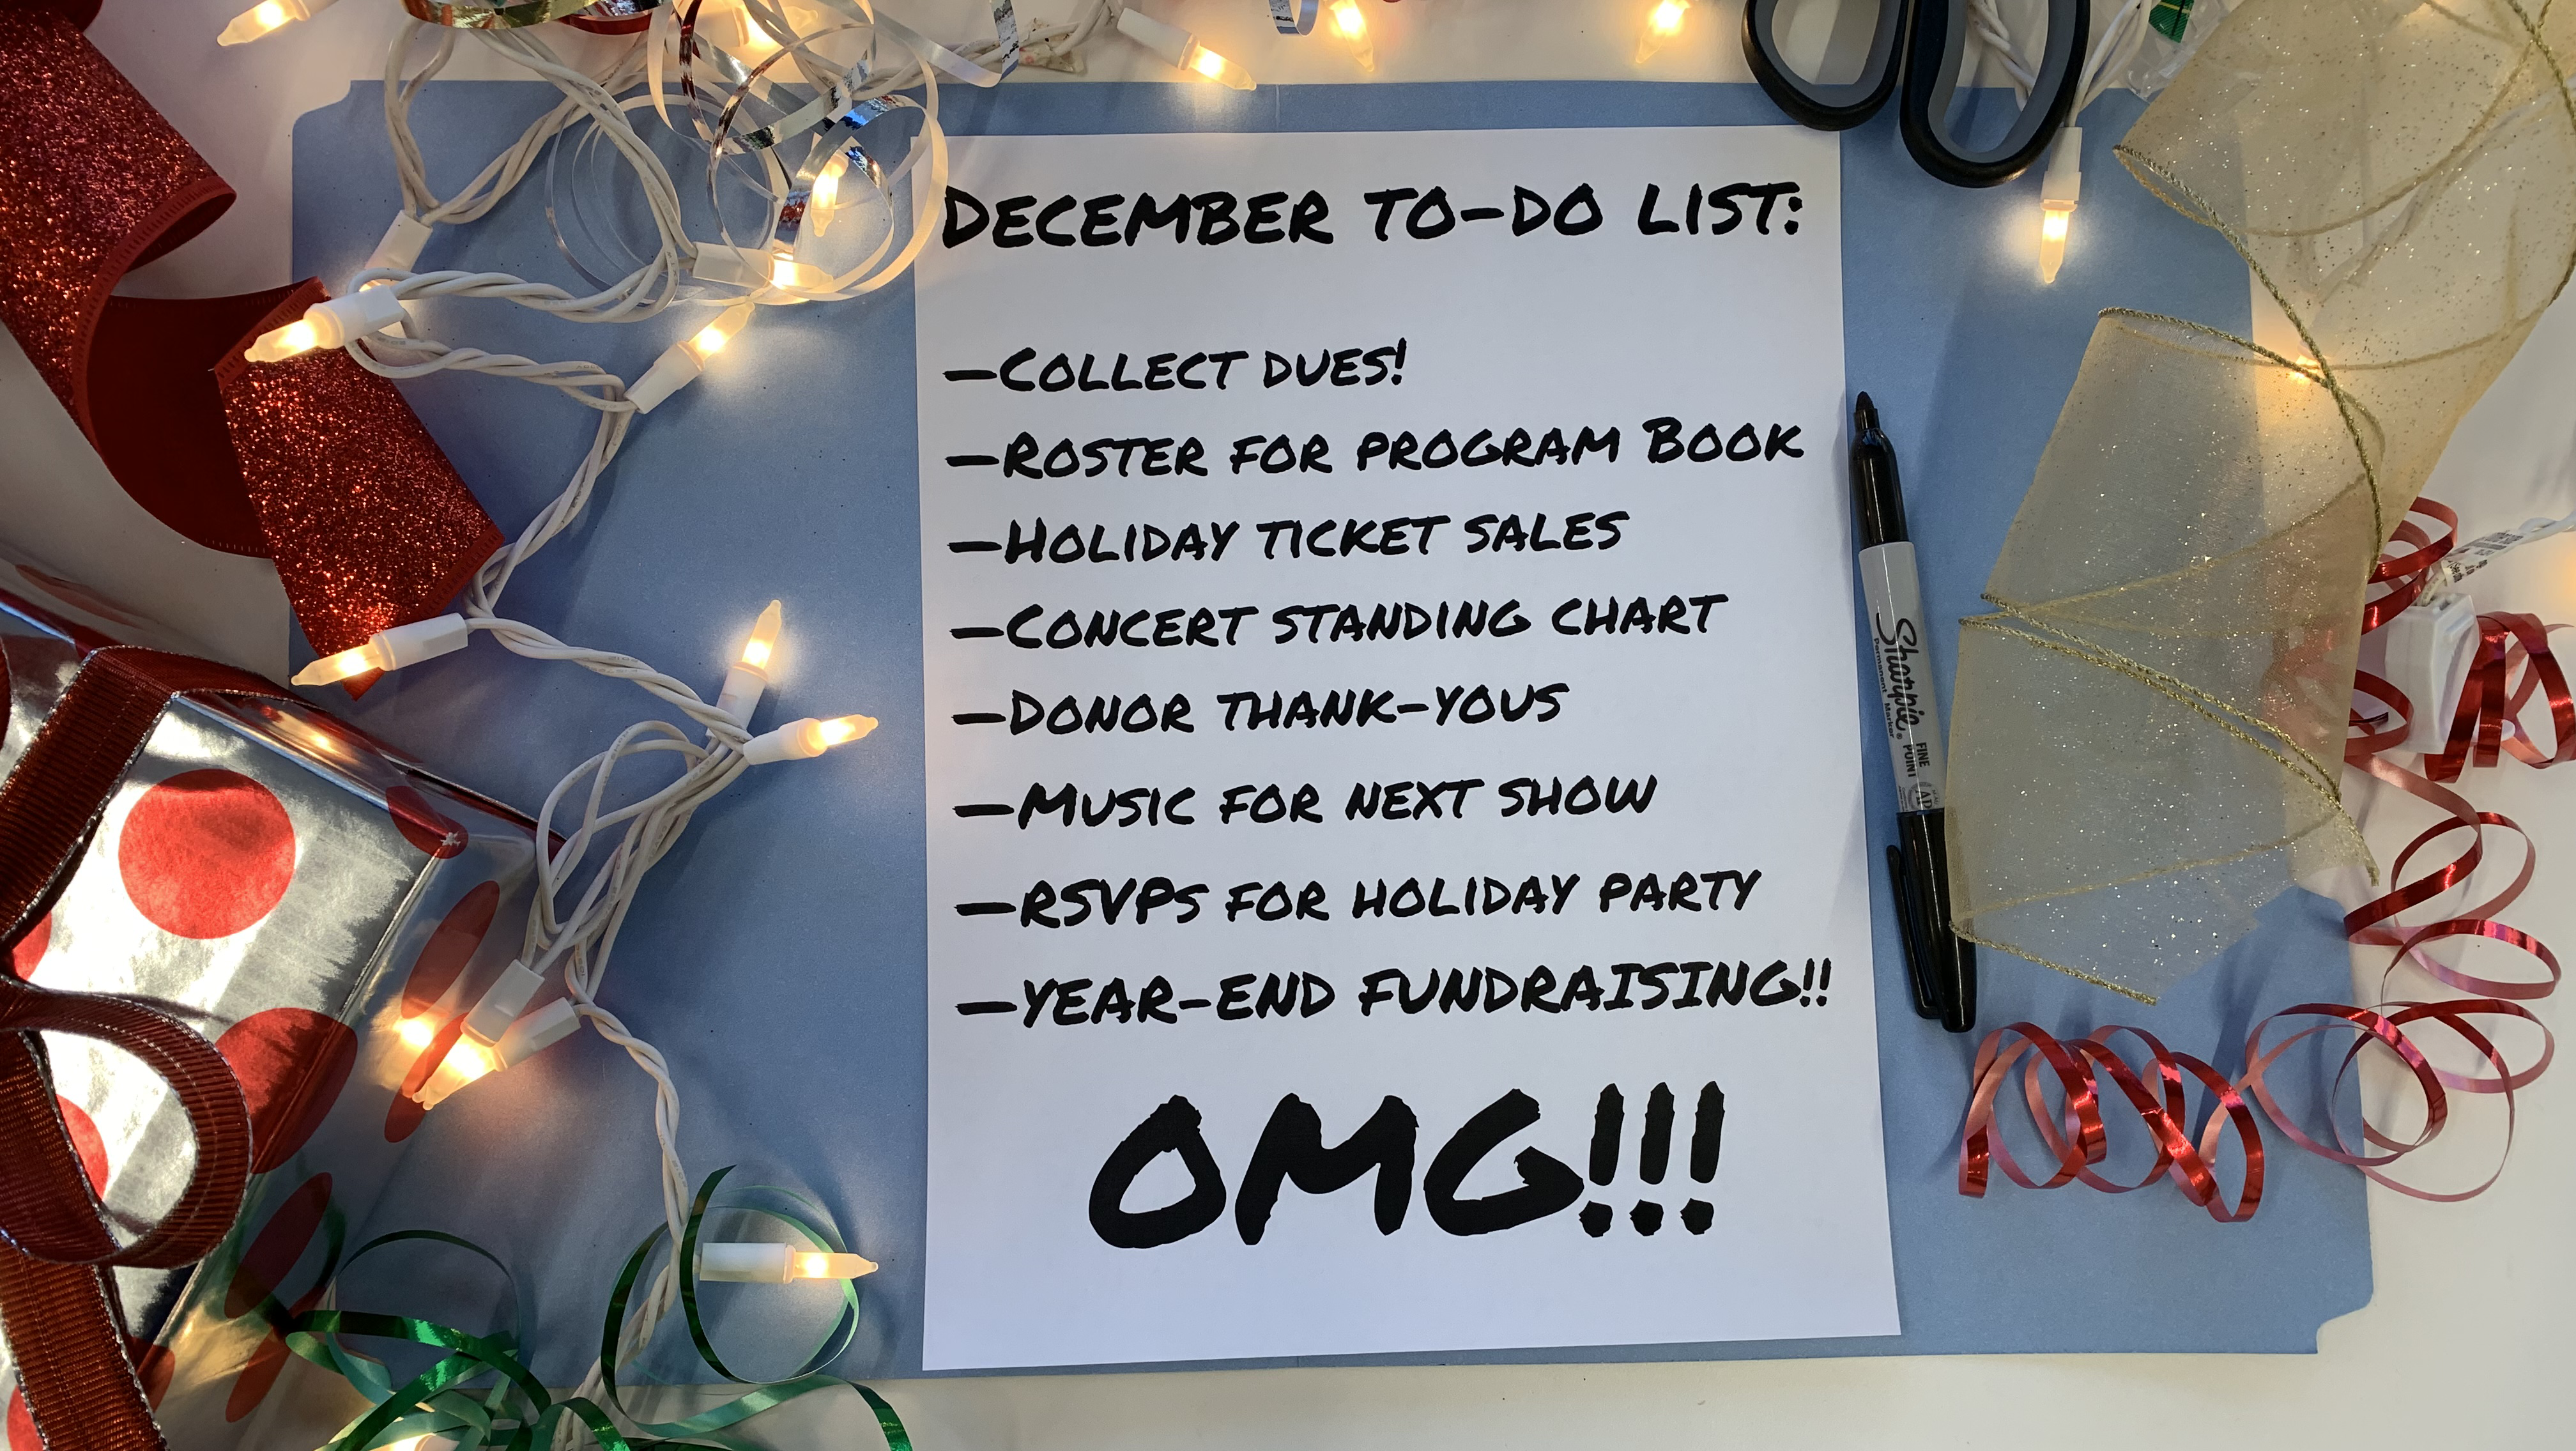 december to do list for choirs